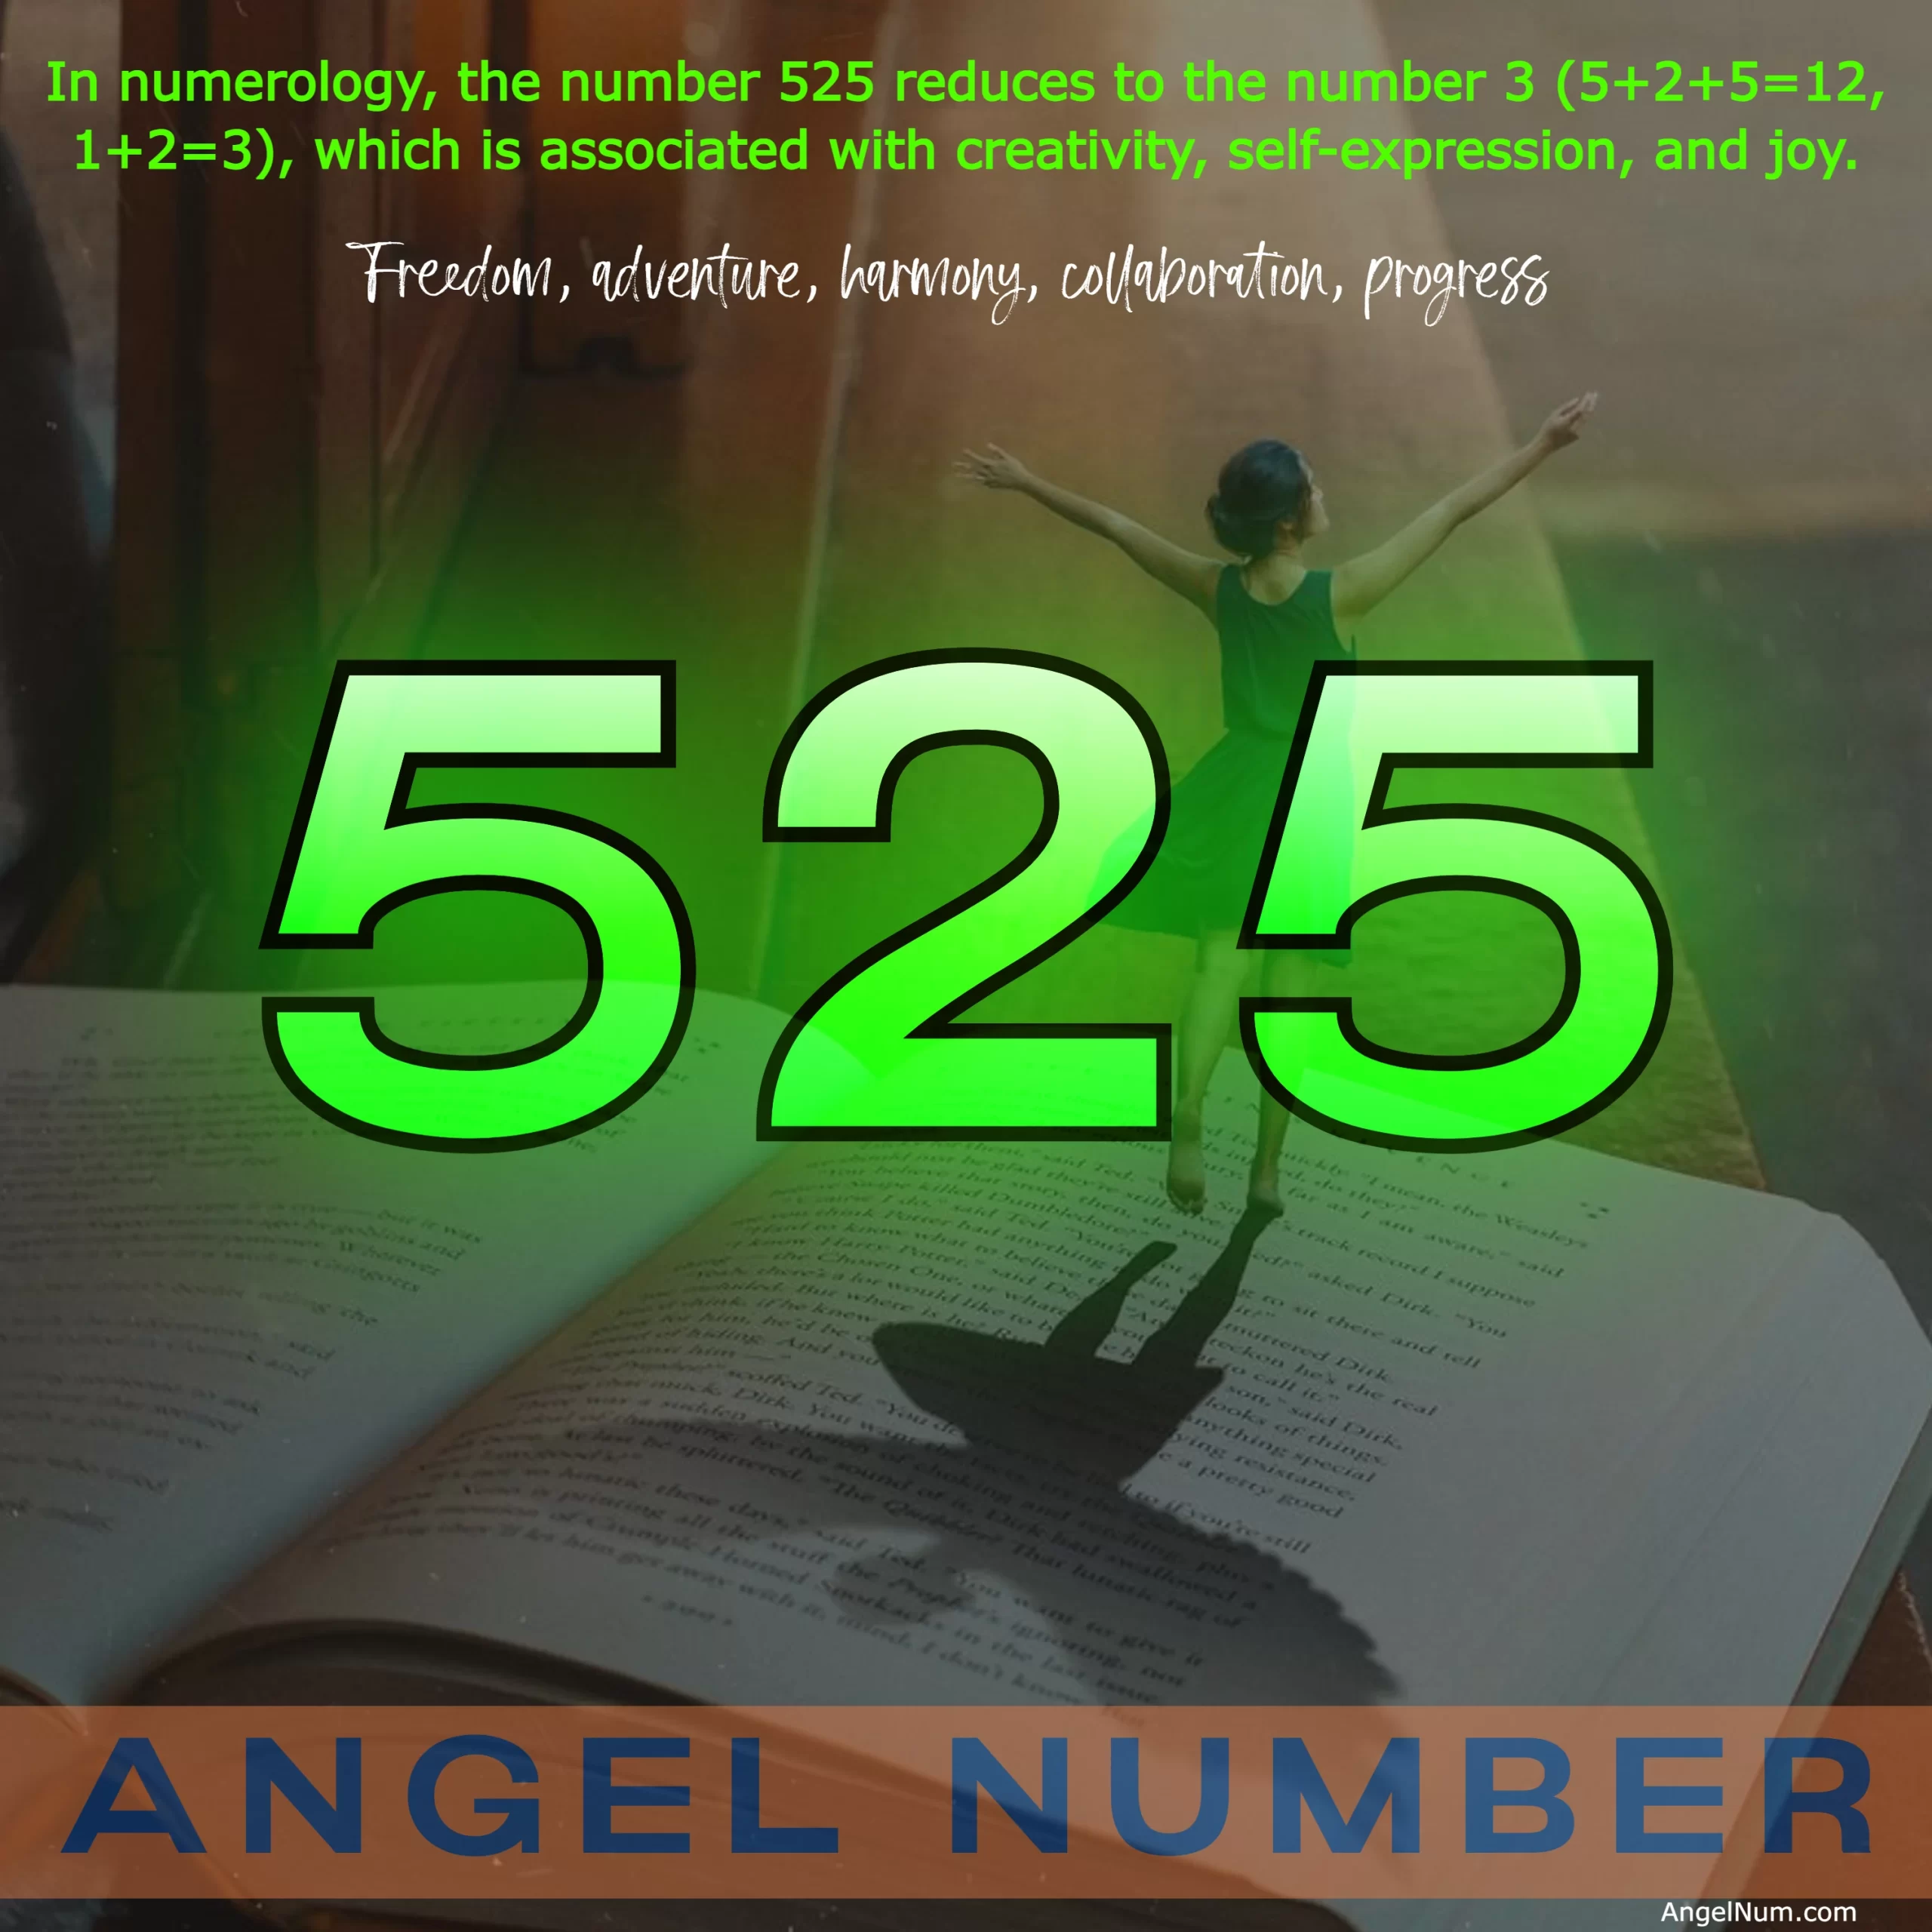 Angel Number 525: Change, Balance, and Cooperation